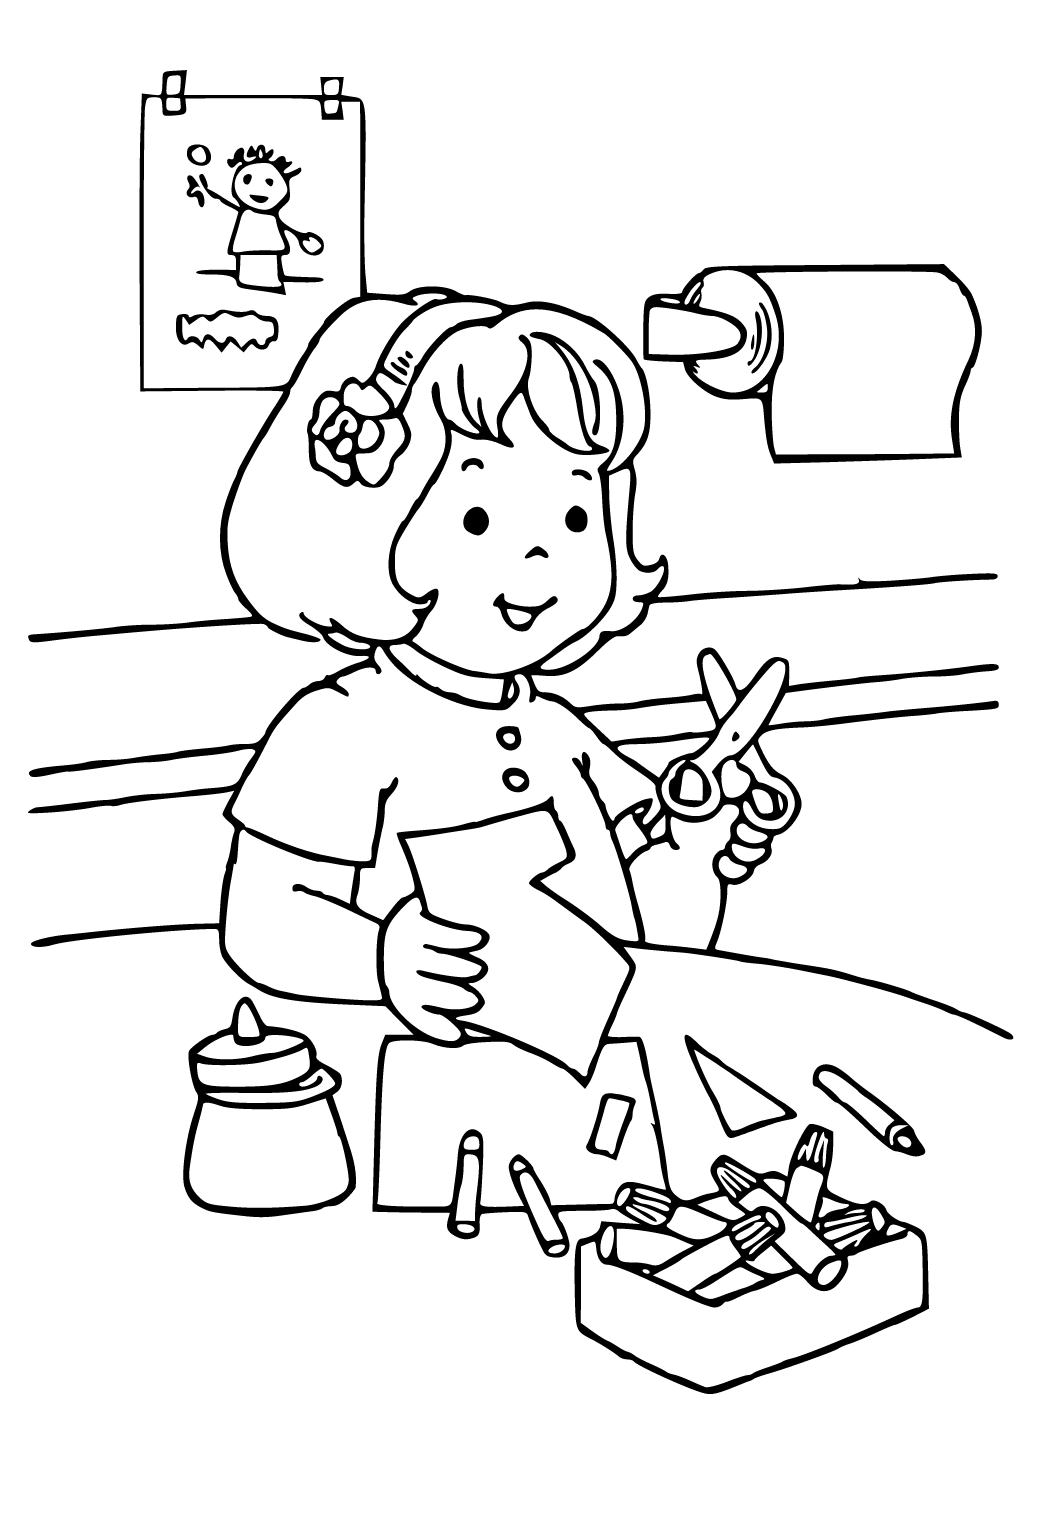 scissors coloring page